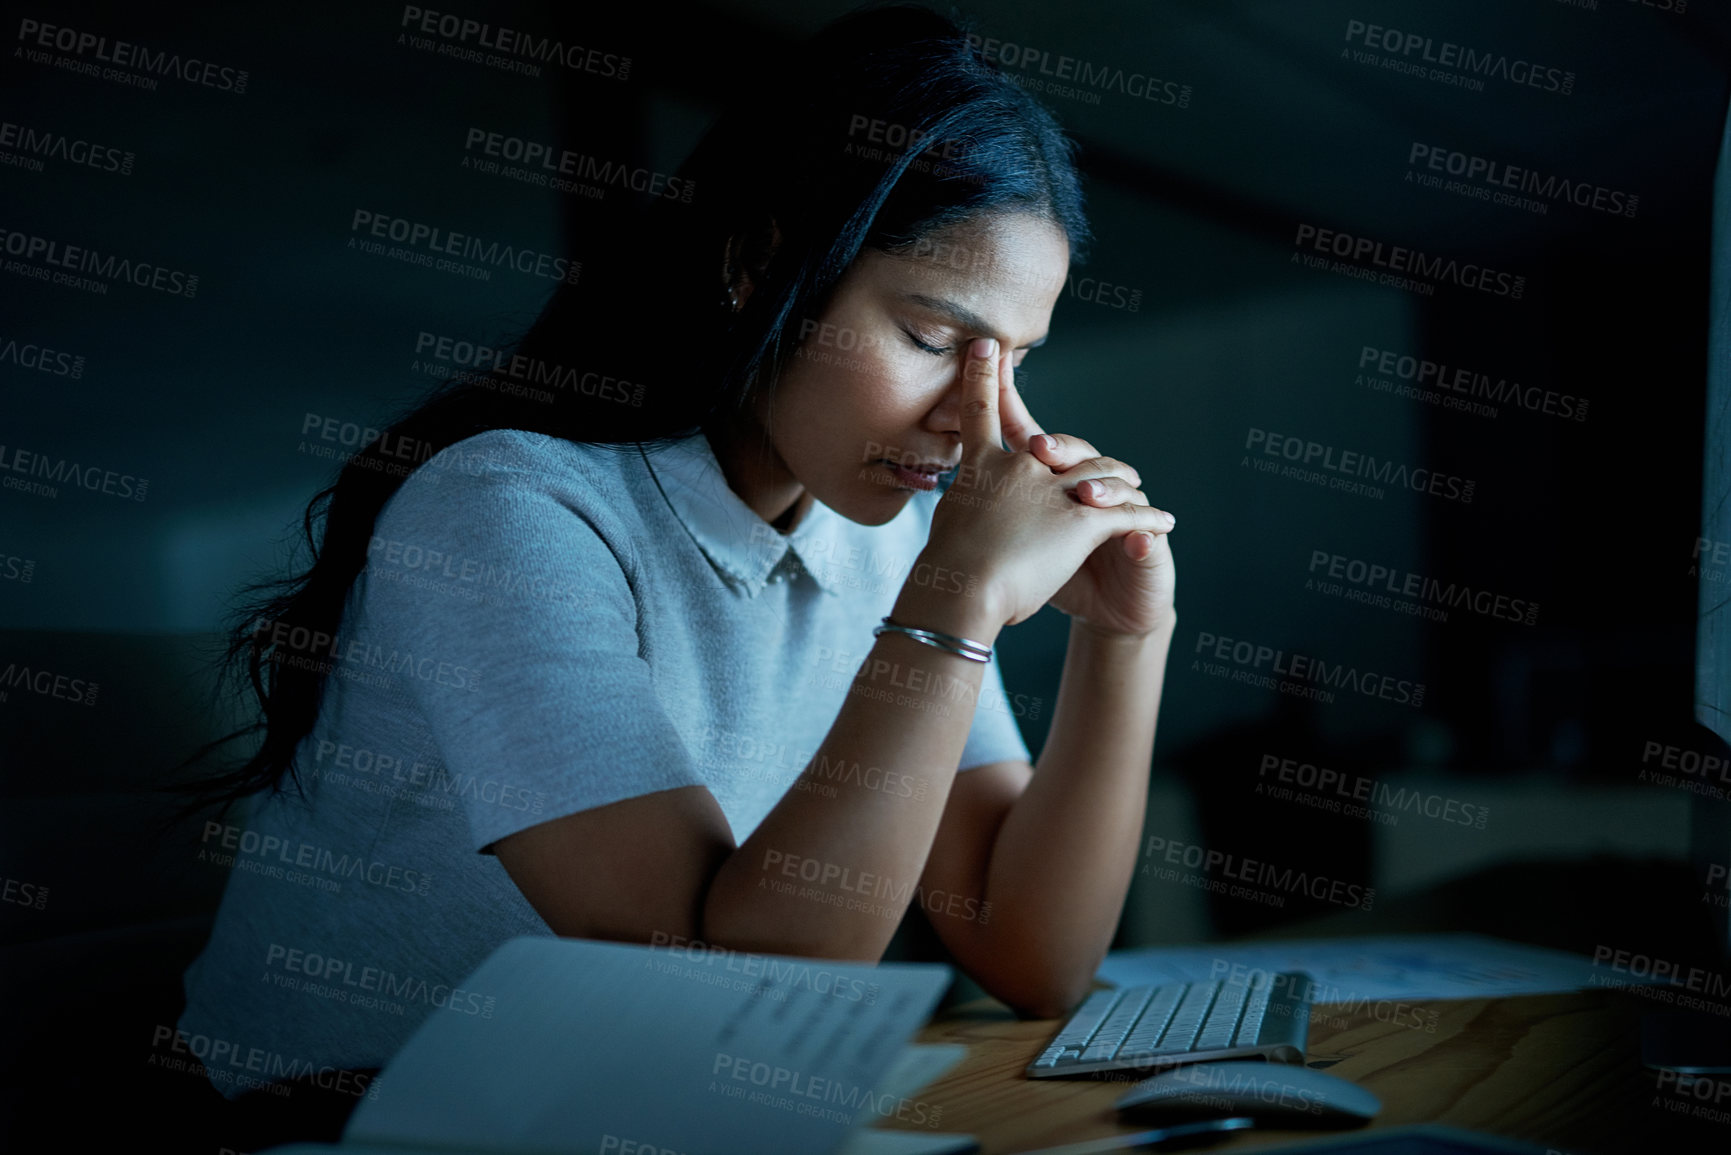 Buy stock photo Shot of a young businesswoman looking stressed while using a computer during a late night at work